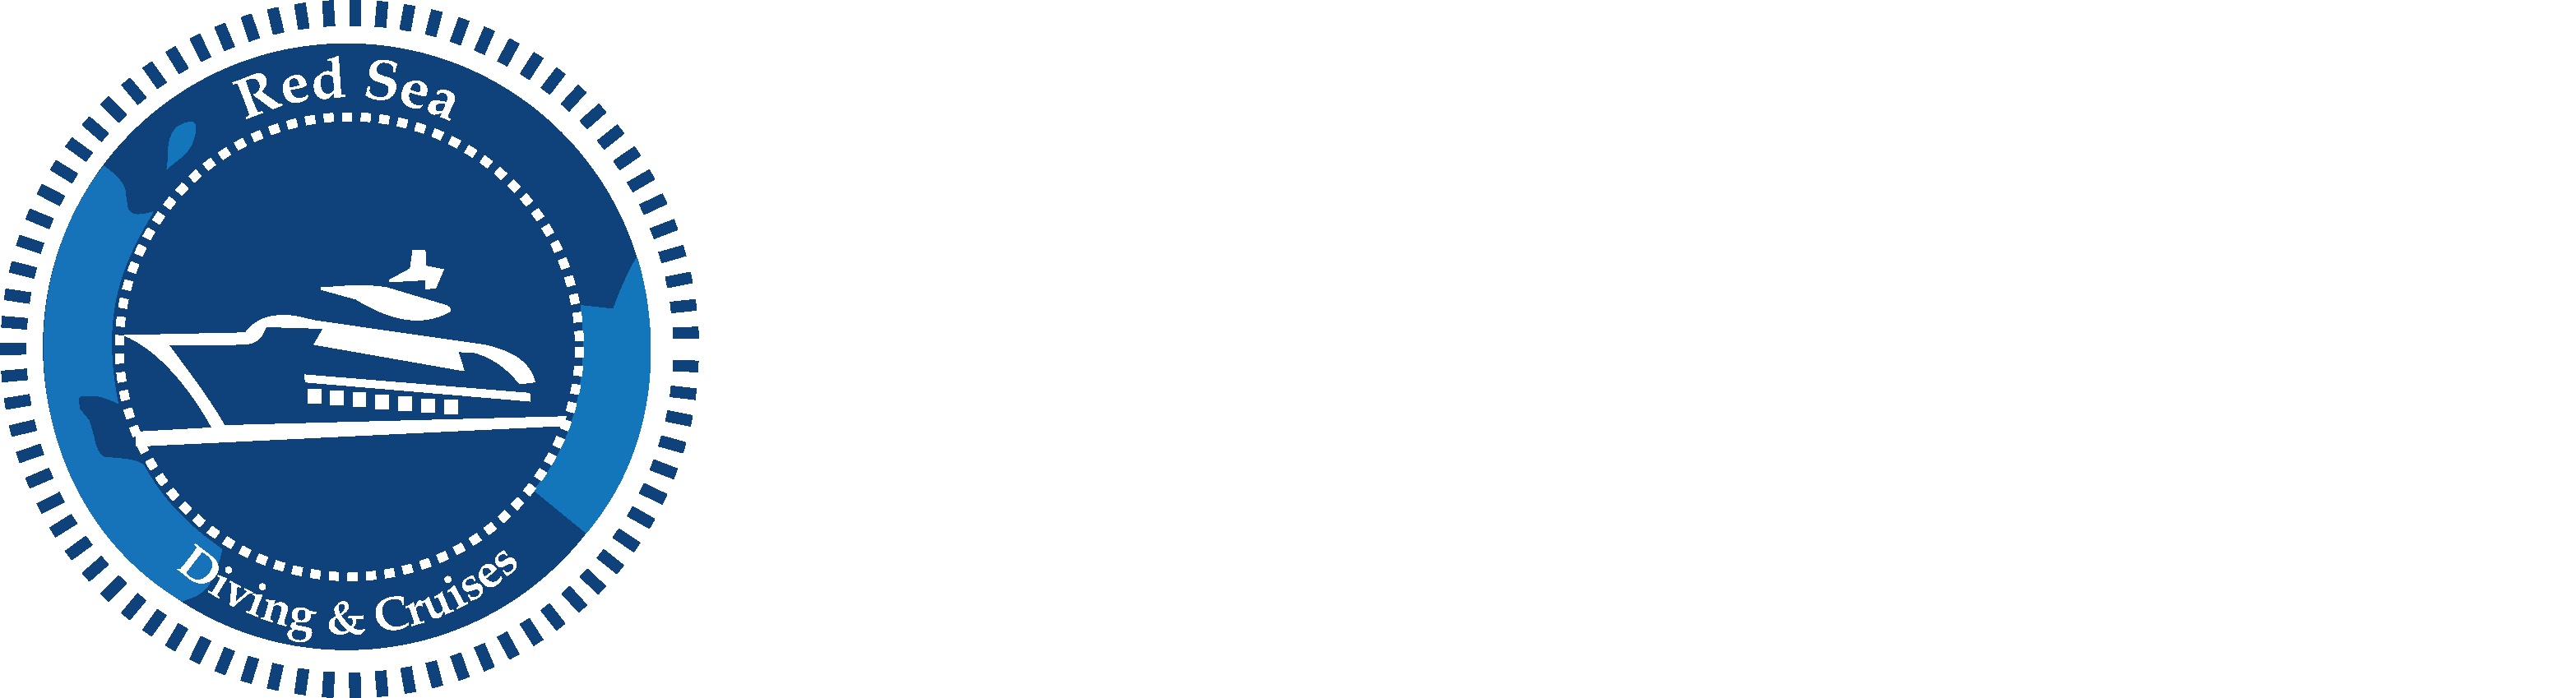 Red Sea Diving & Cruises